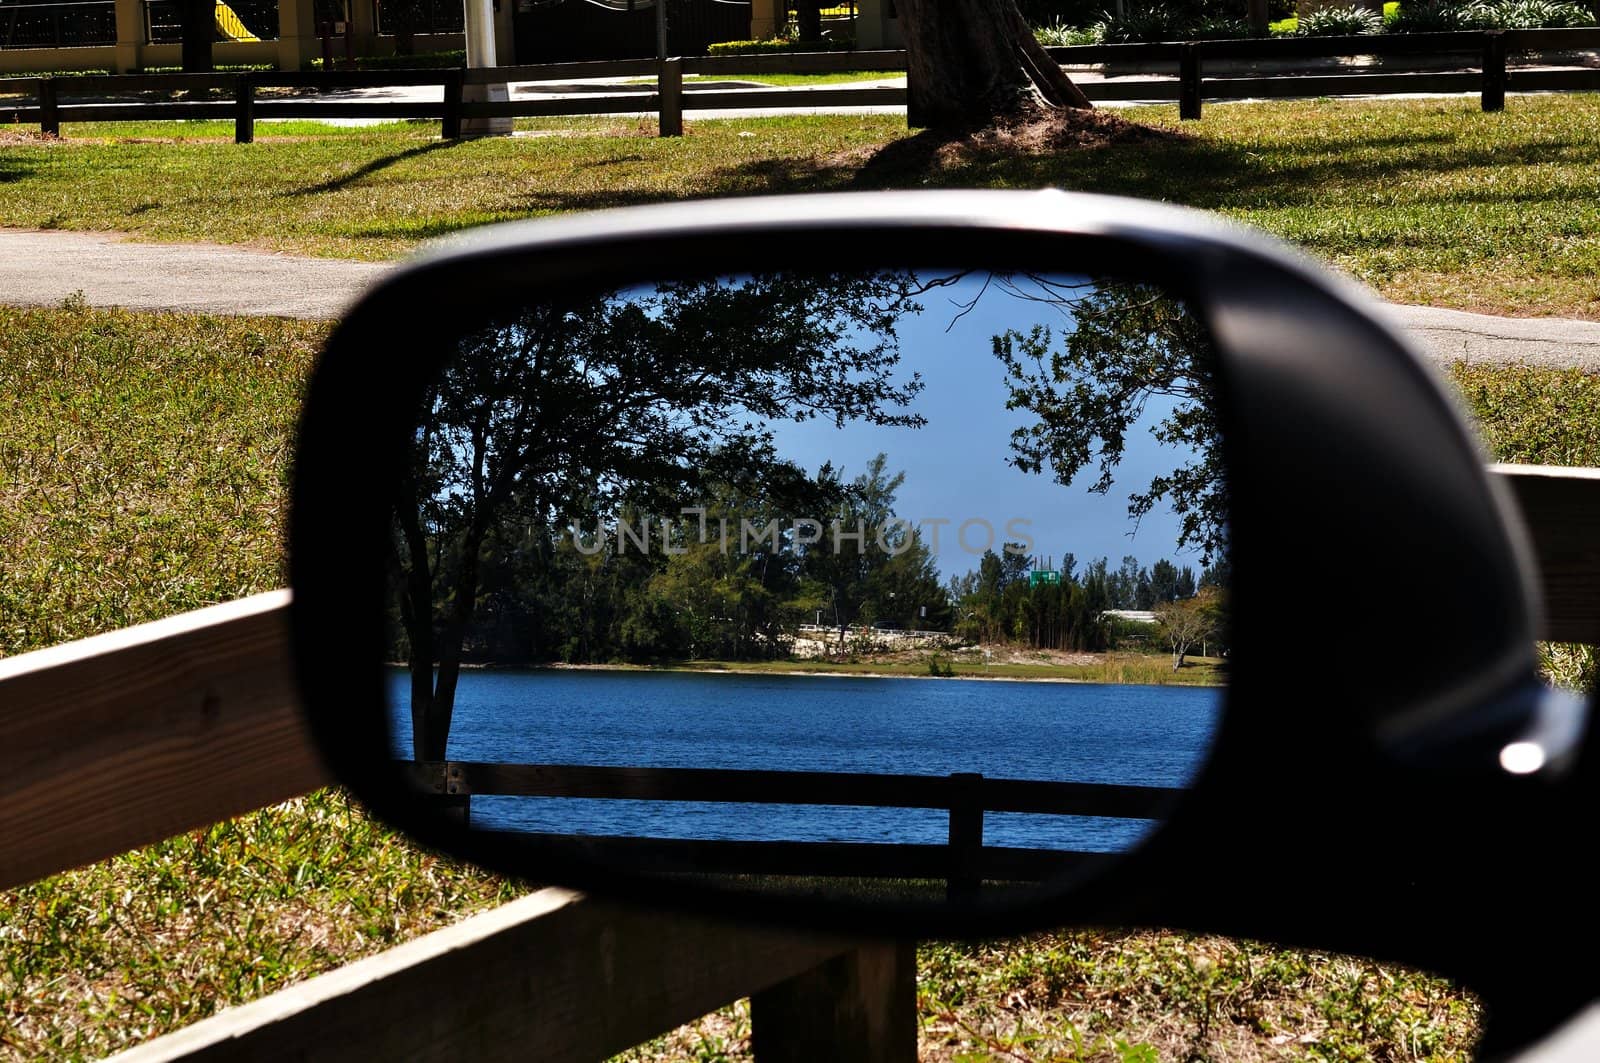 Sideview Mirror Lake Reflection by fernando2148